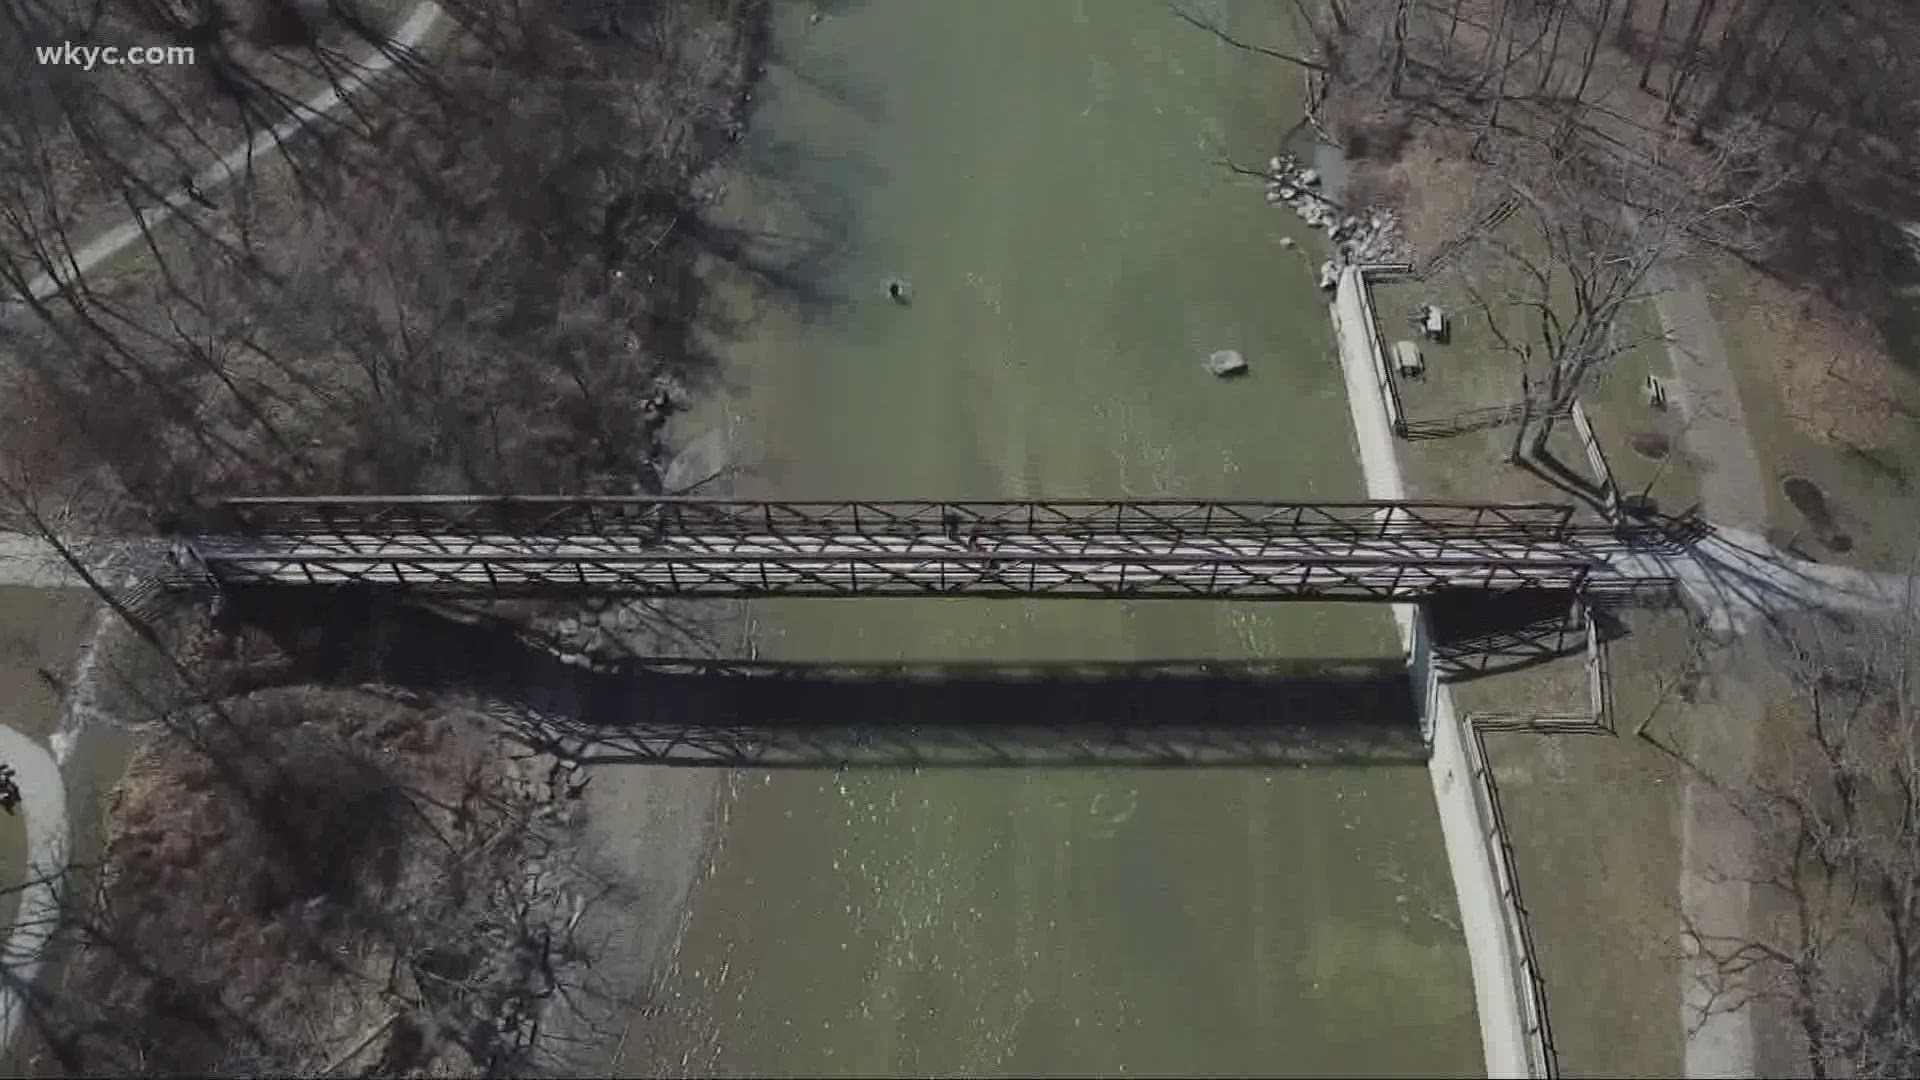 March 5, 2021: With spring just a few weeks away, our drone captured some end-of-winter scenes in Eastlake where the Chagrin River meets Lake Erie.